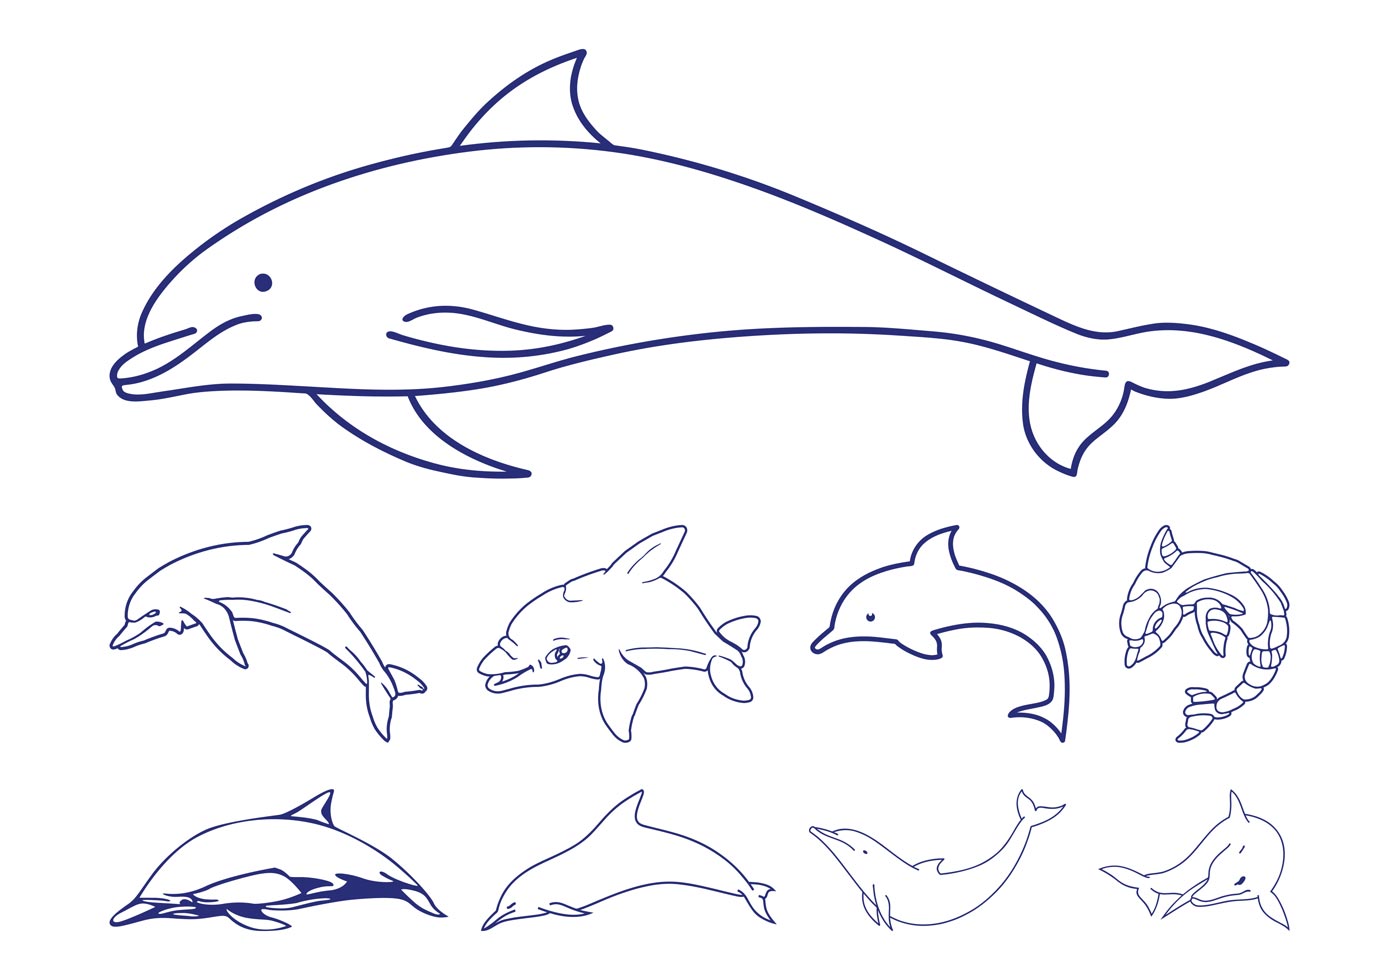 Dolphins Outlines Download Free Vector Art, Stock